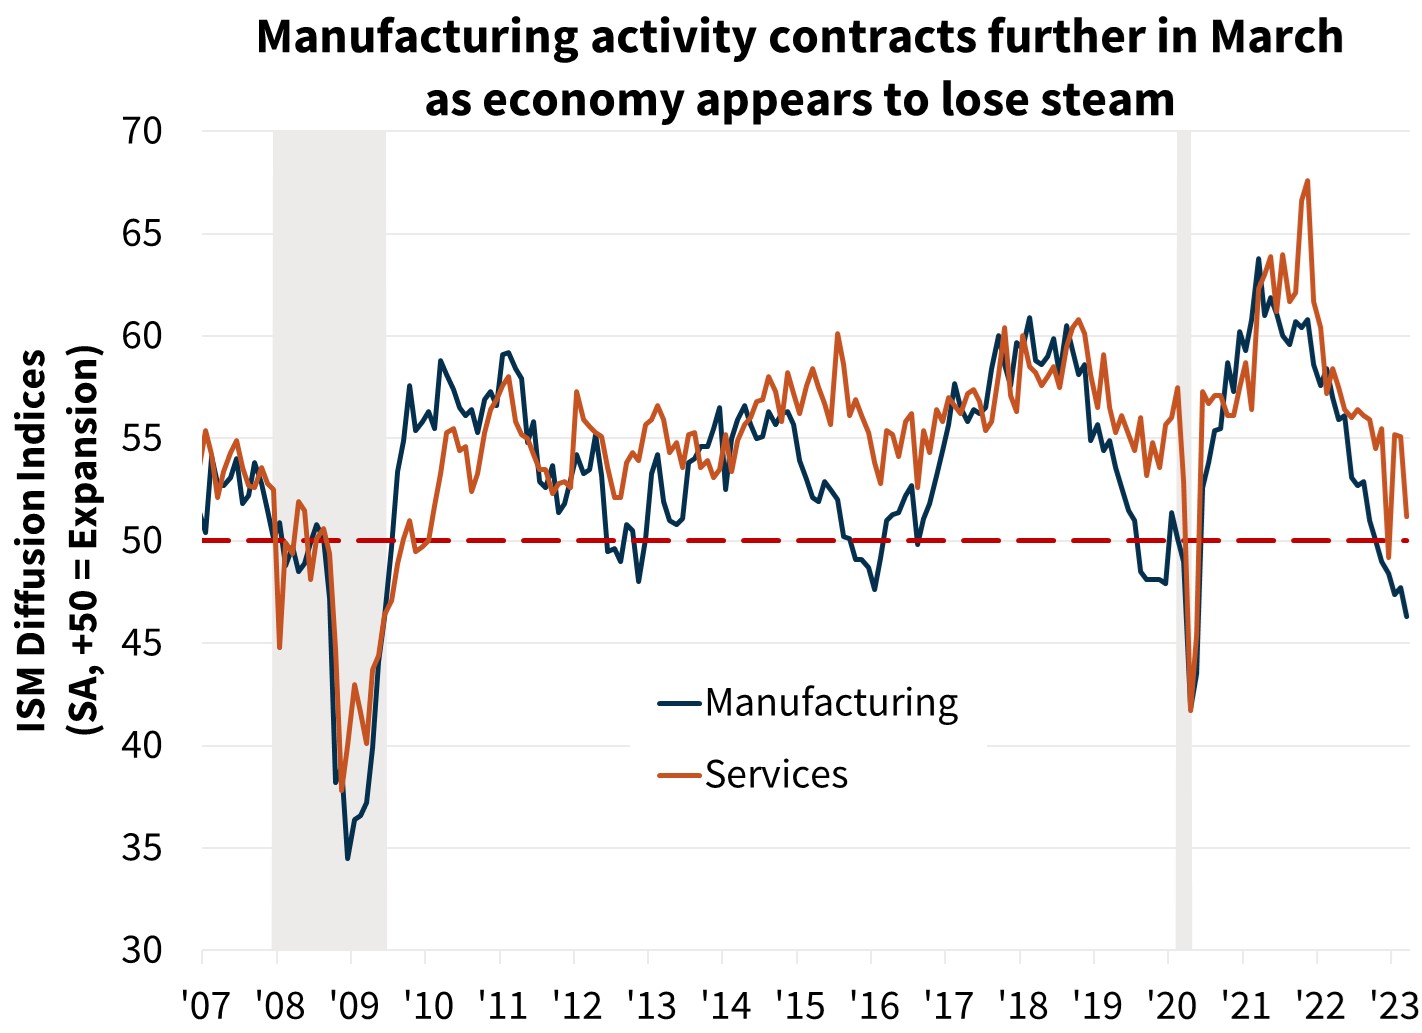  Manufacturing activity contracts further in March as economy appears to lose steam 